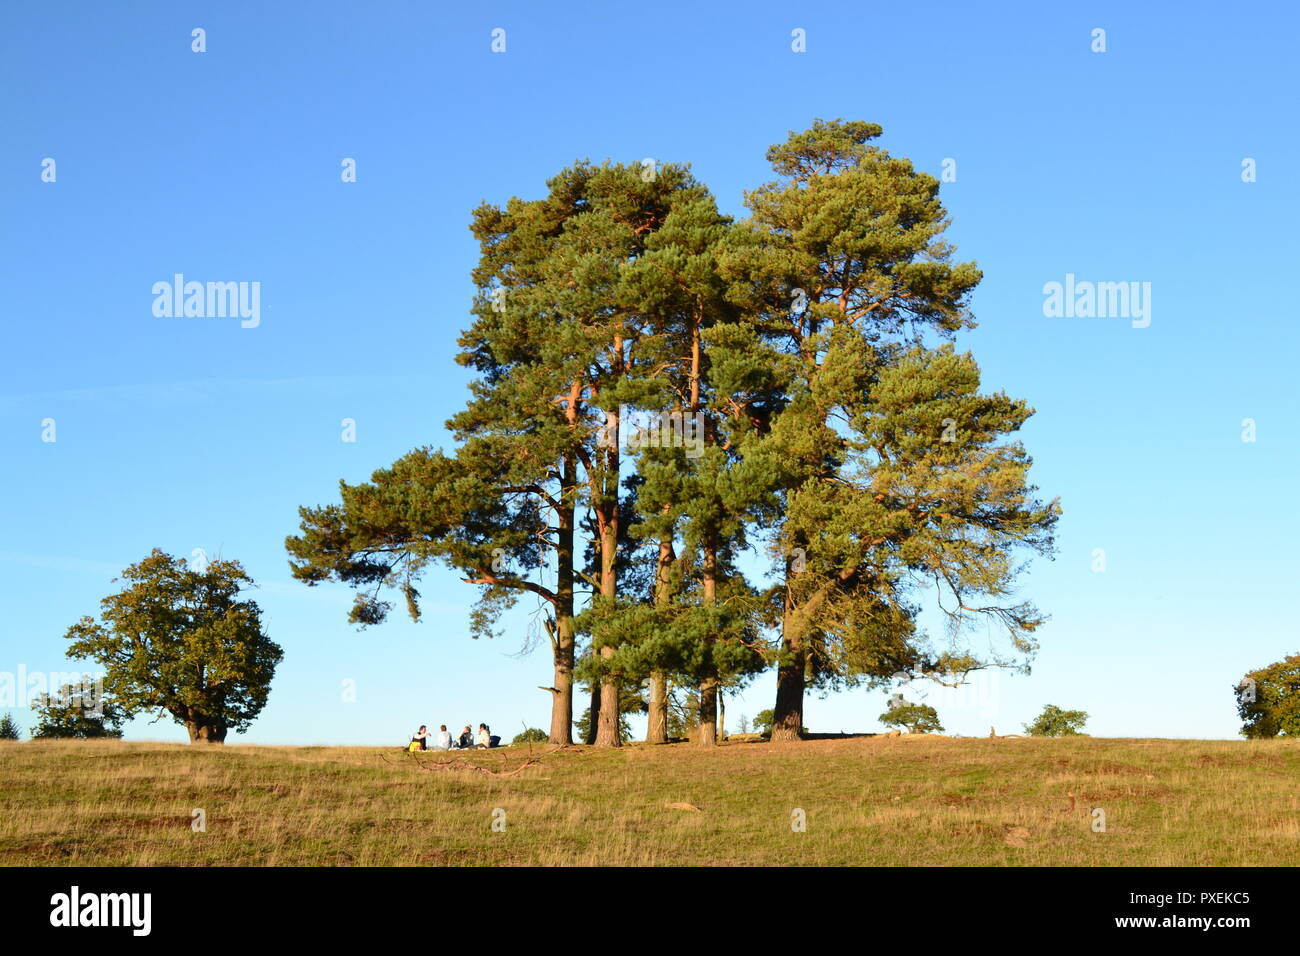 Autumn, mid-October 2018 at Knole Park, Sevenoaks, Kent, England, UK. Beautiful weather. People having a picnic by a pine tree clump Stock Photo